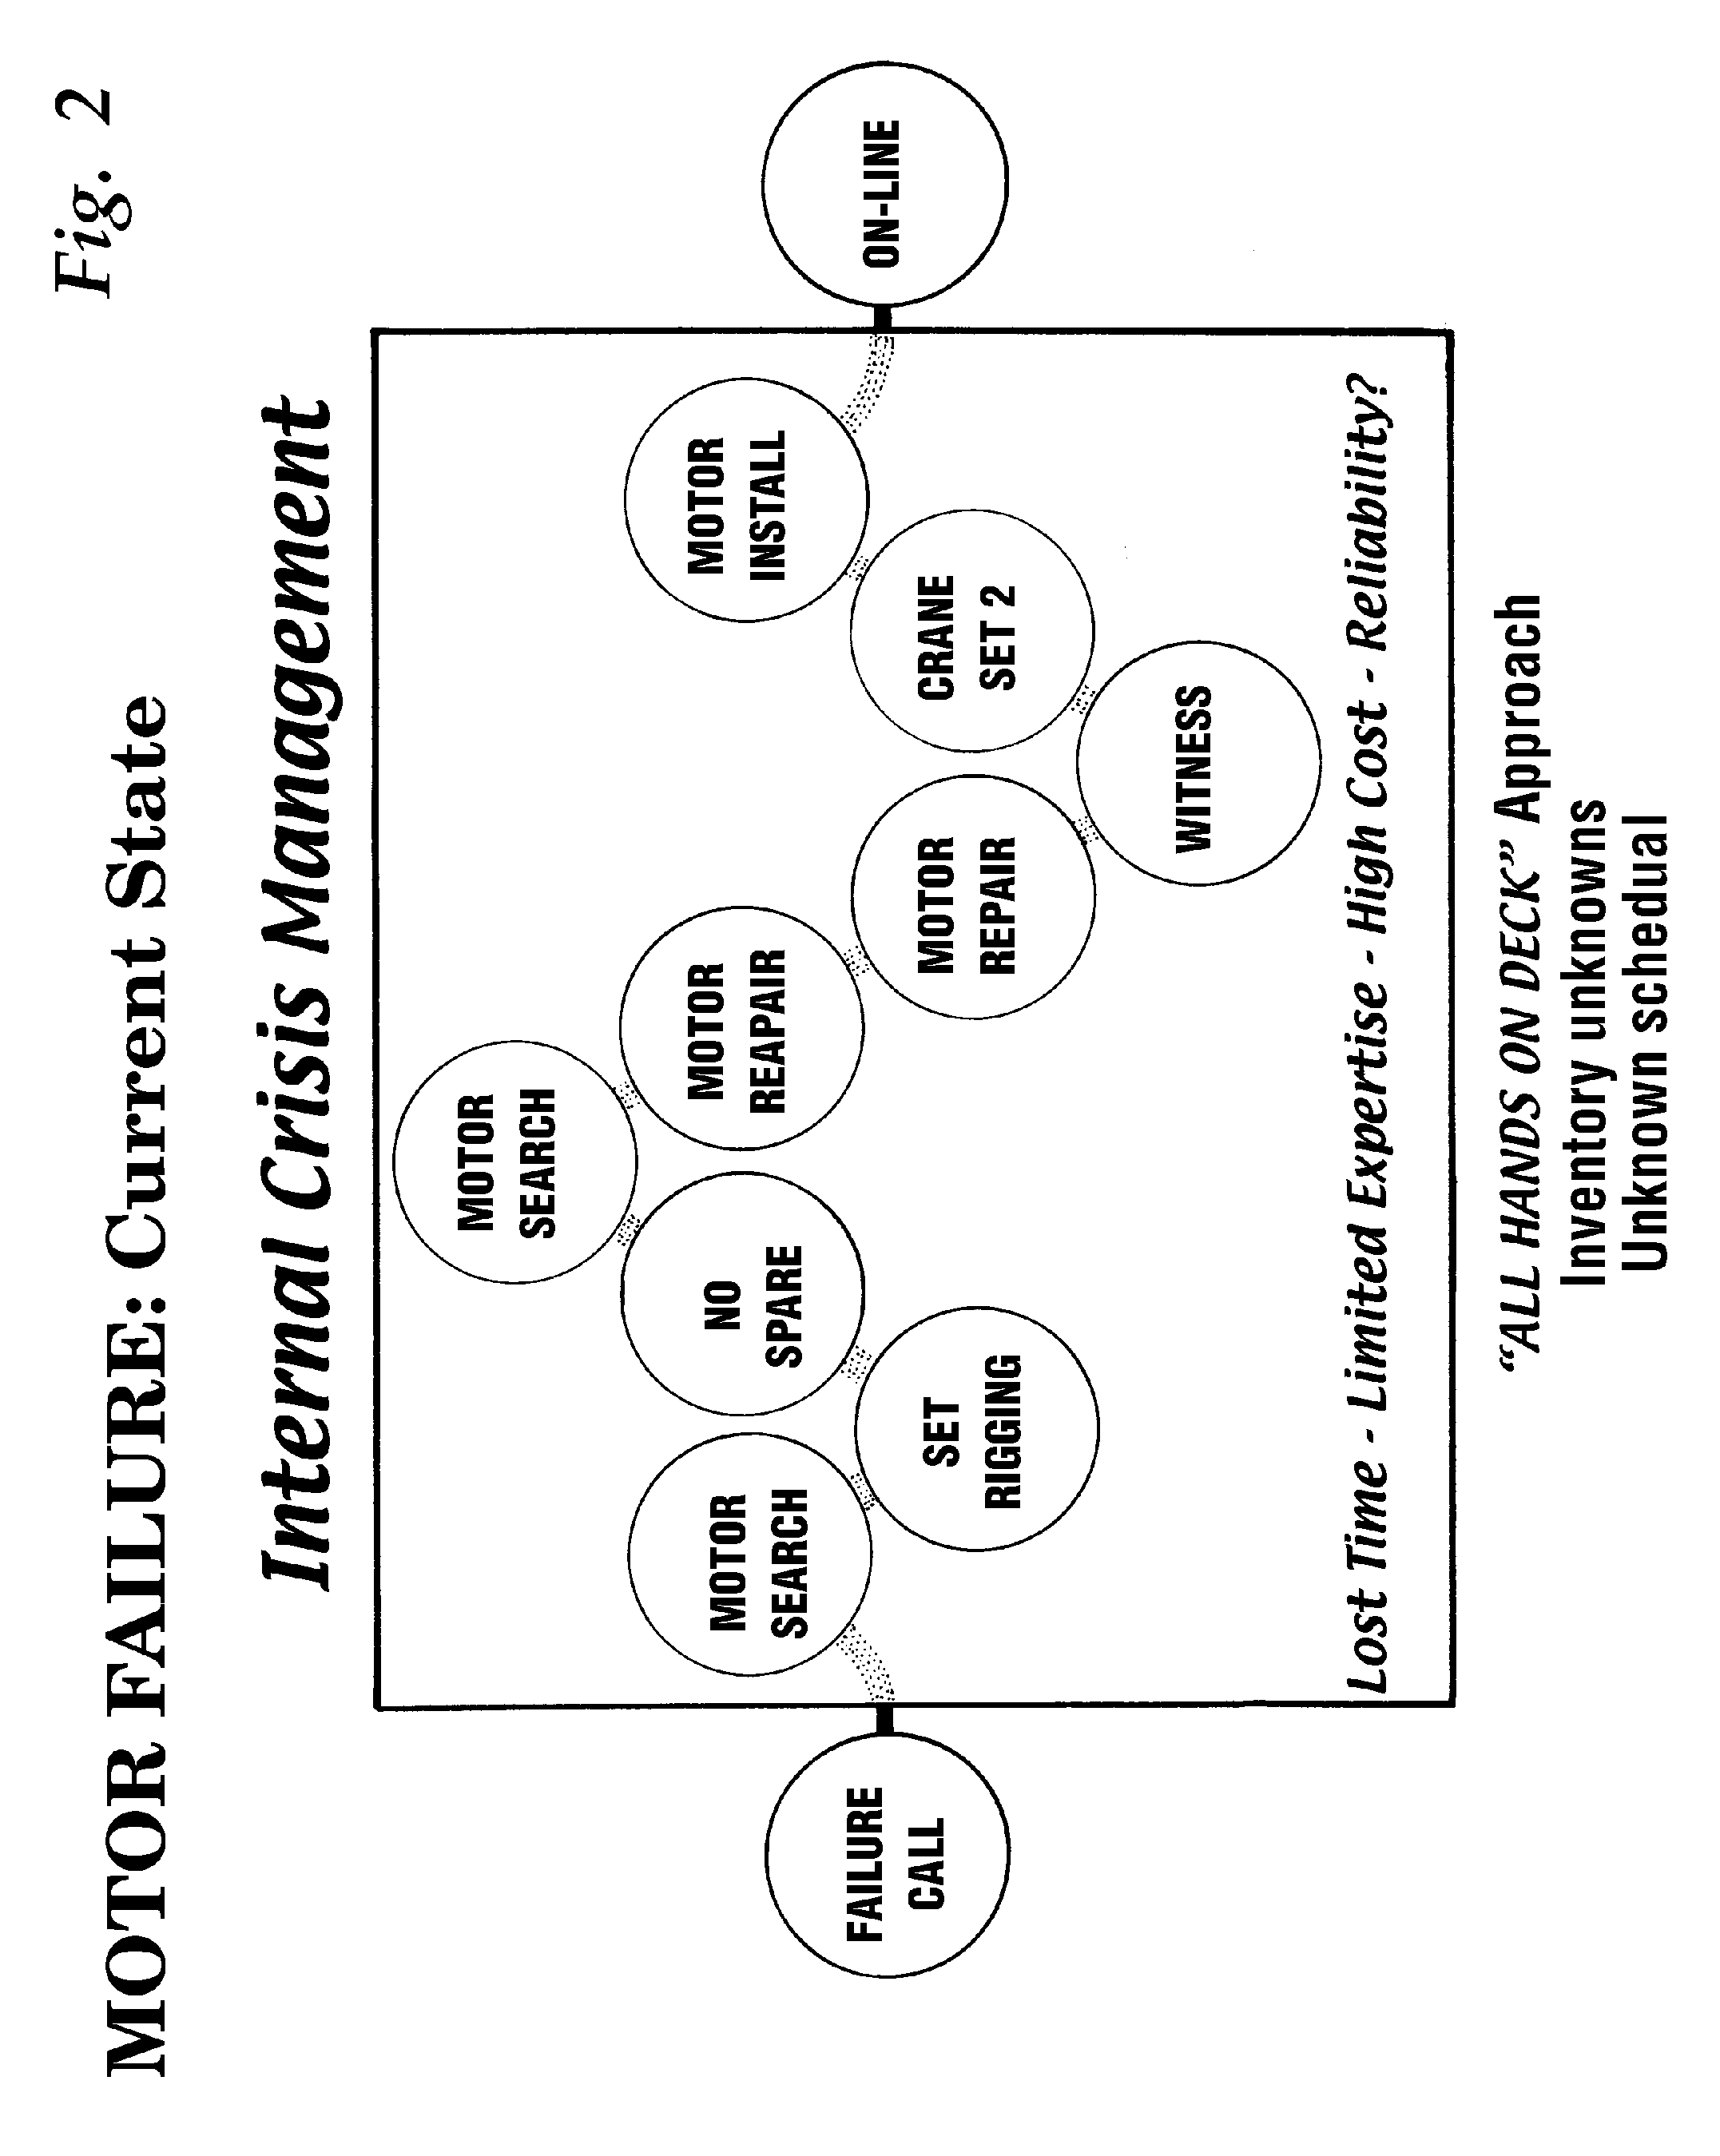 Process for providing replacement electric motors